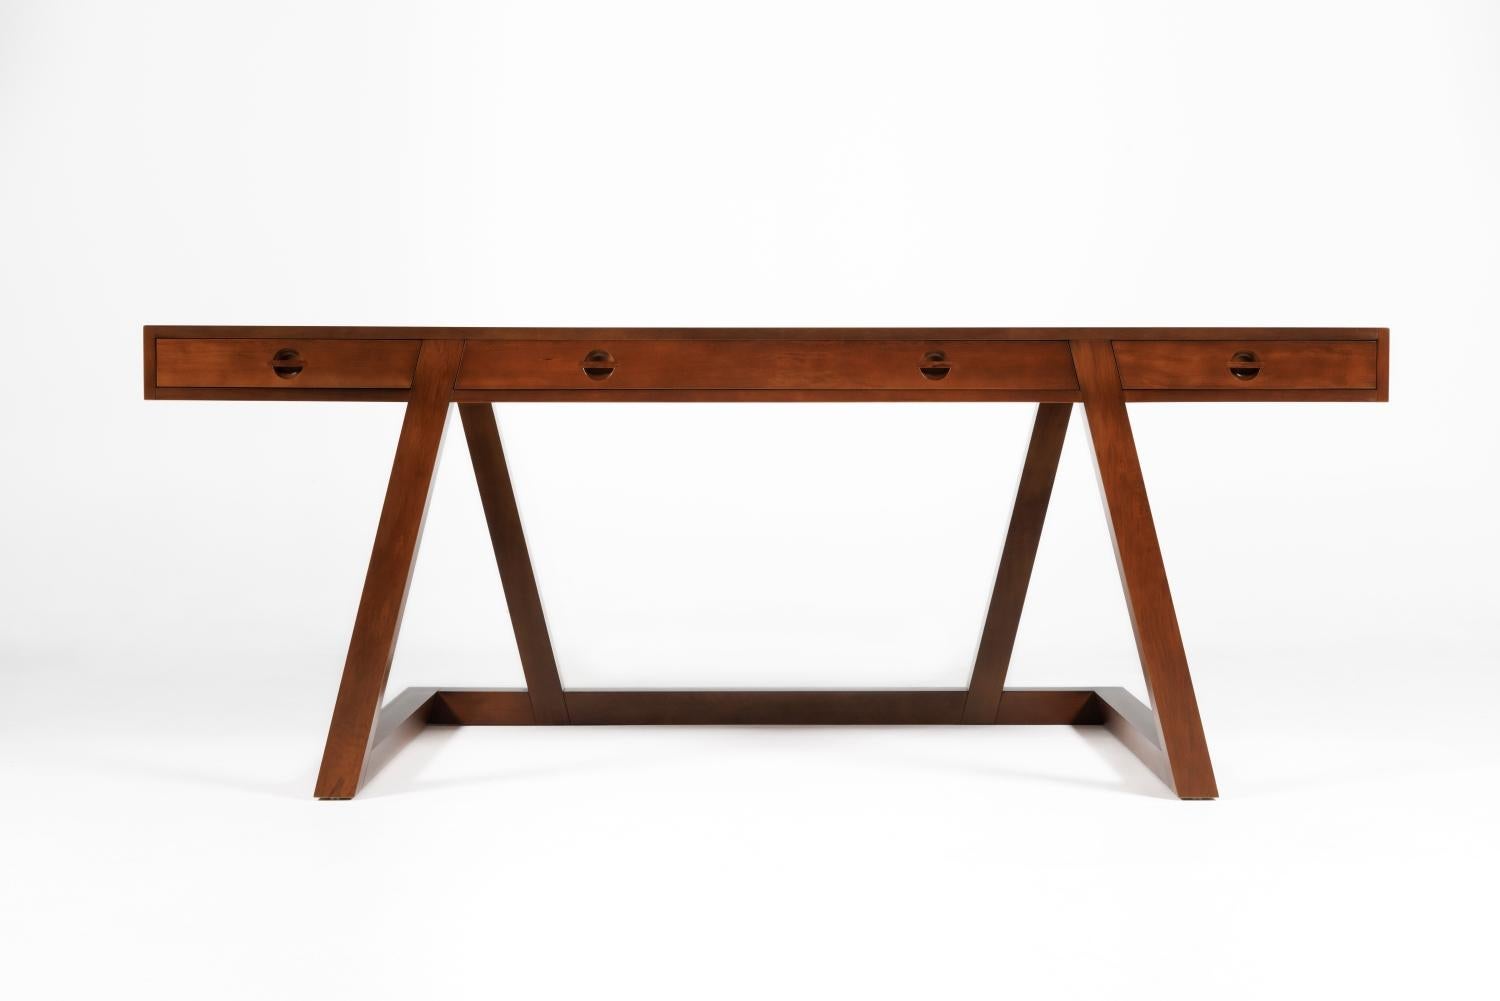 New Zealand Luxury Mid-Century Modern Style Desk made from Sustainable River Rescued Wood For Sale